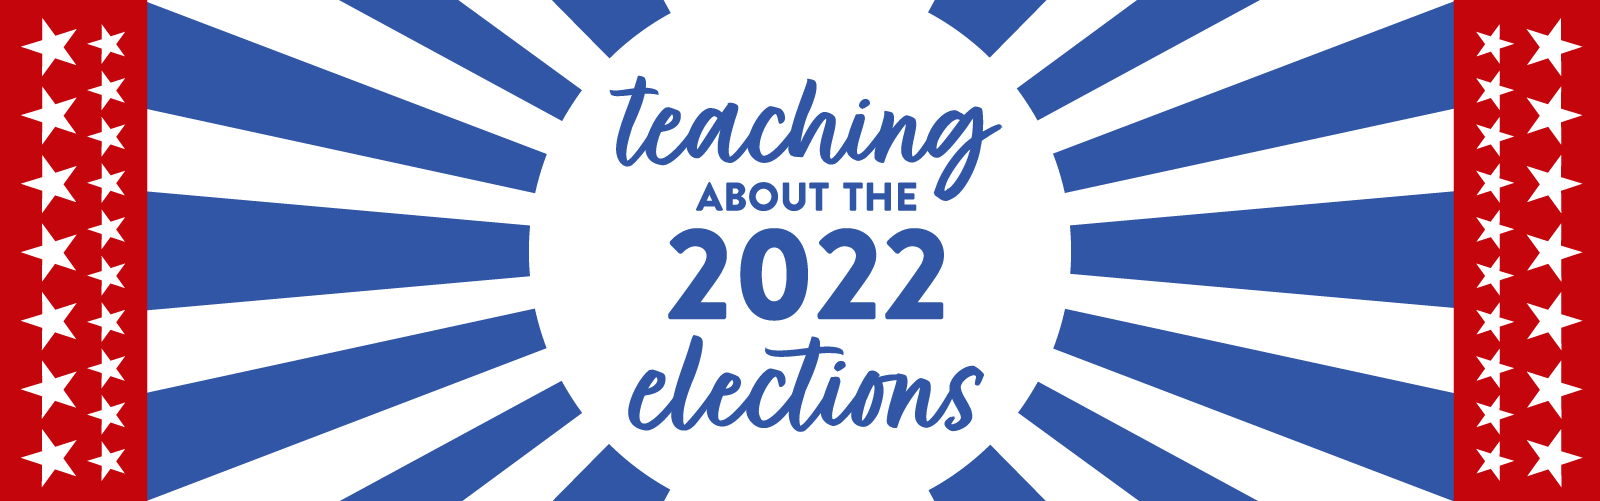 Teaching About the 2022 Elections hero image